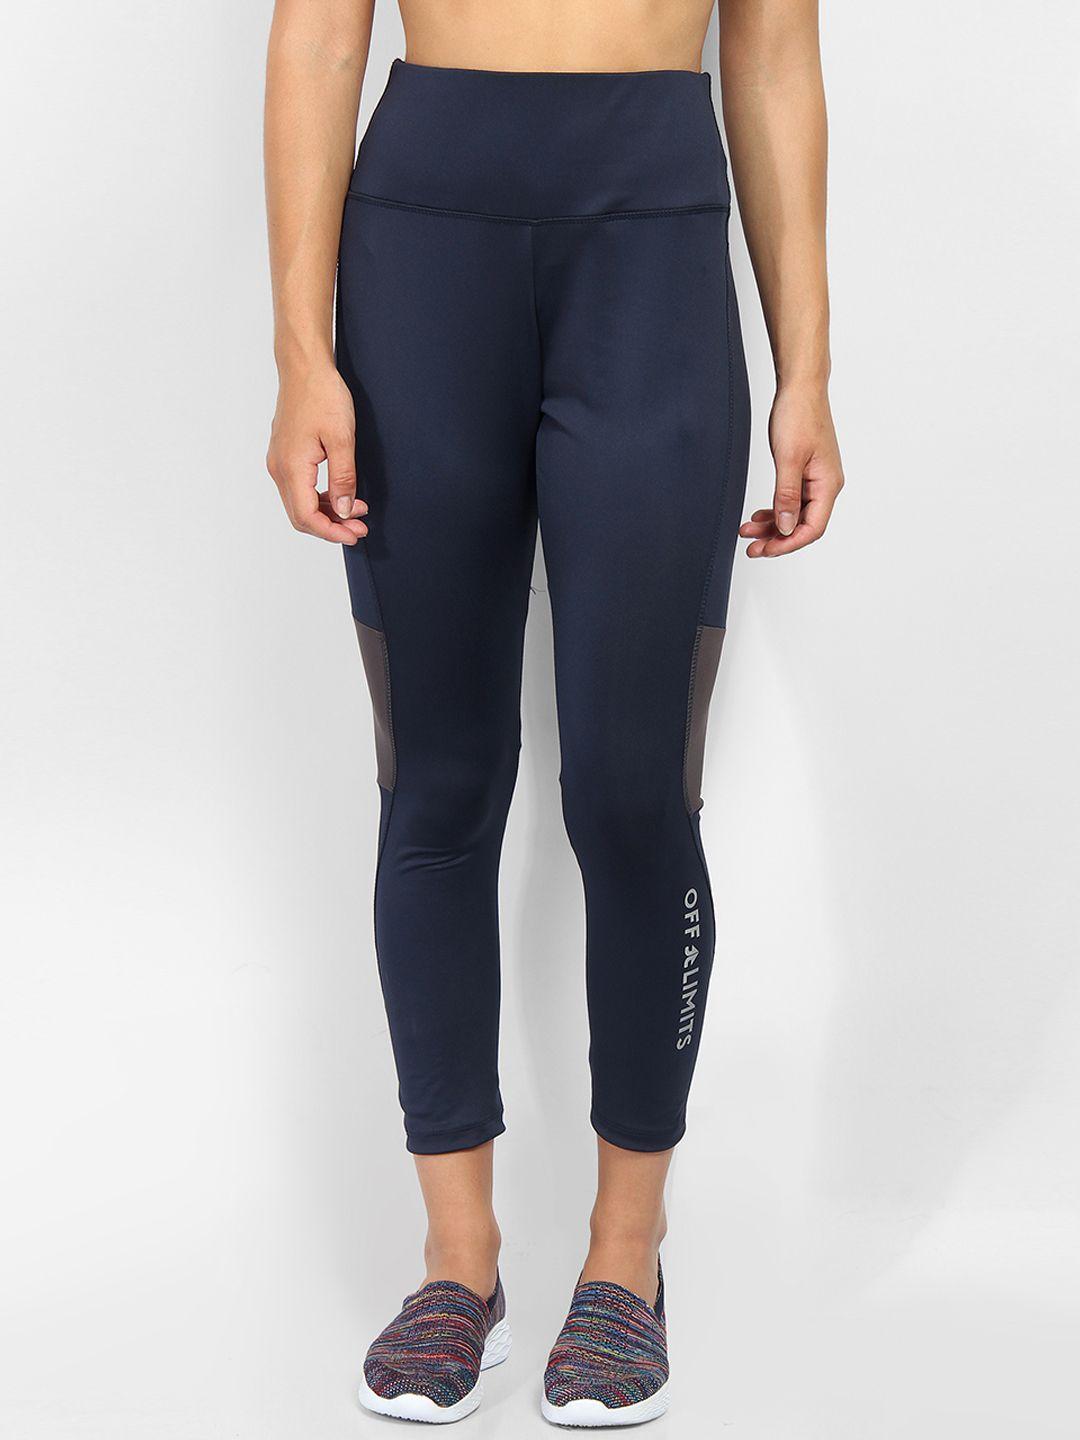 off-limits-women-navy-blue-colourblocked-workout-tights